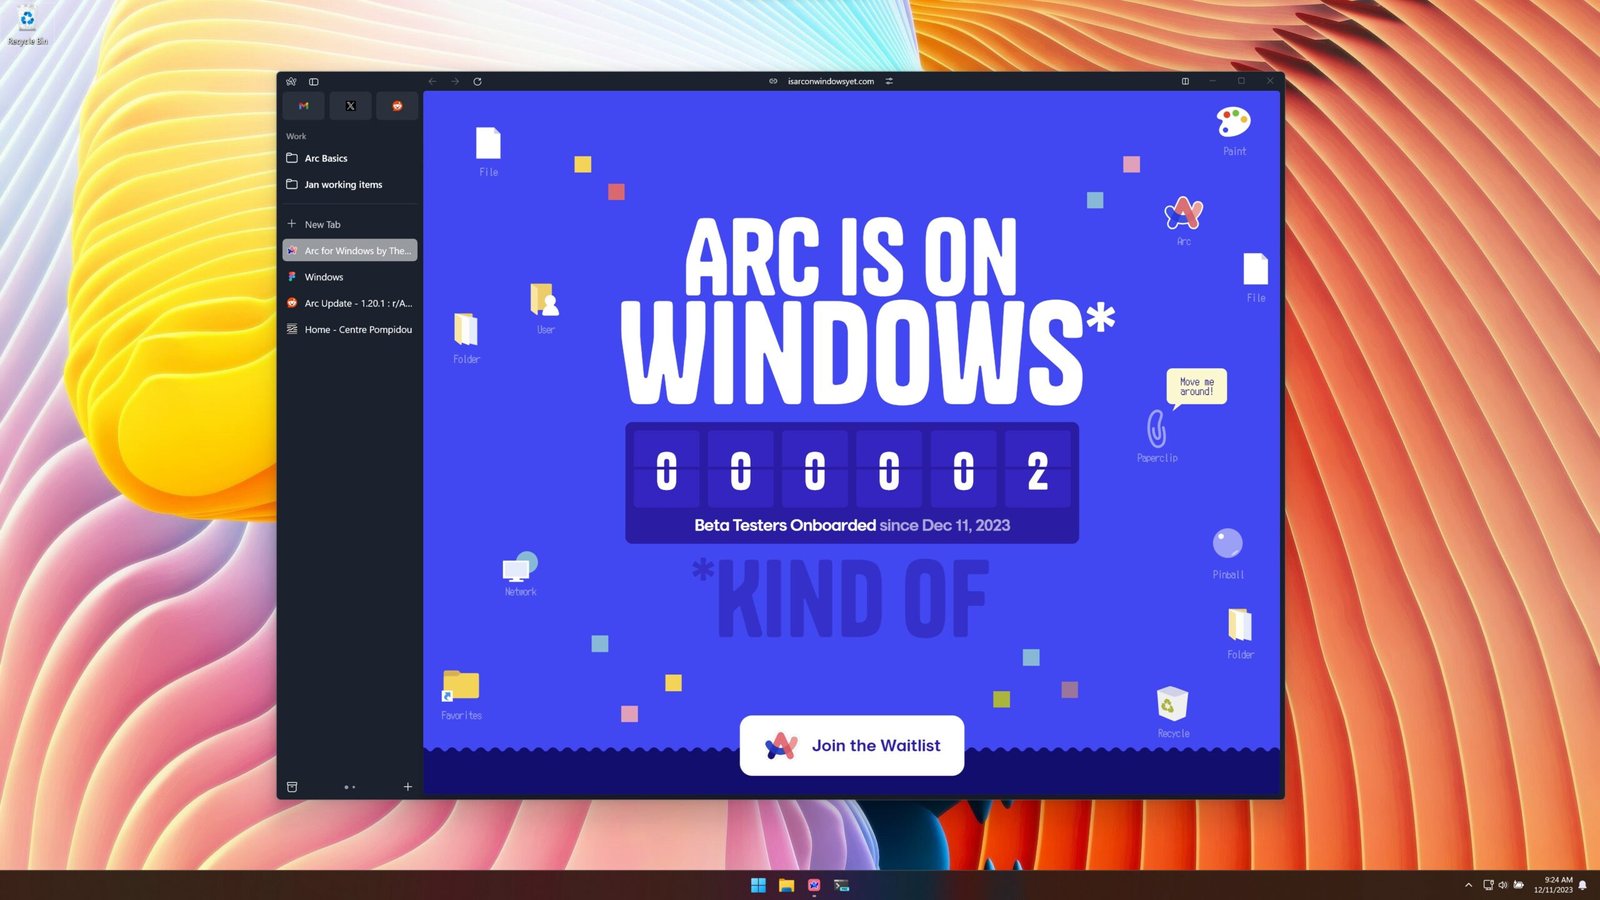 Arc browser launched its Windows client in beta